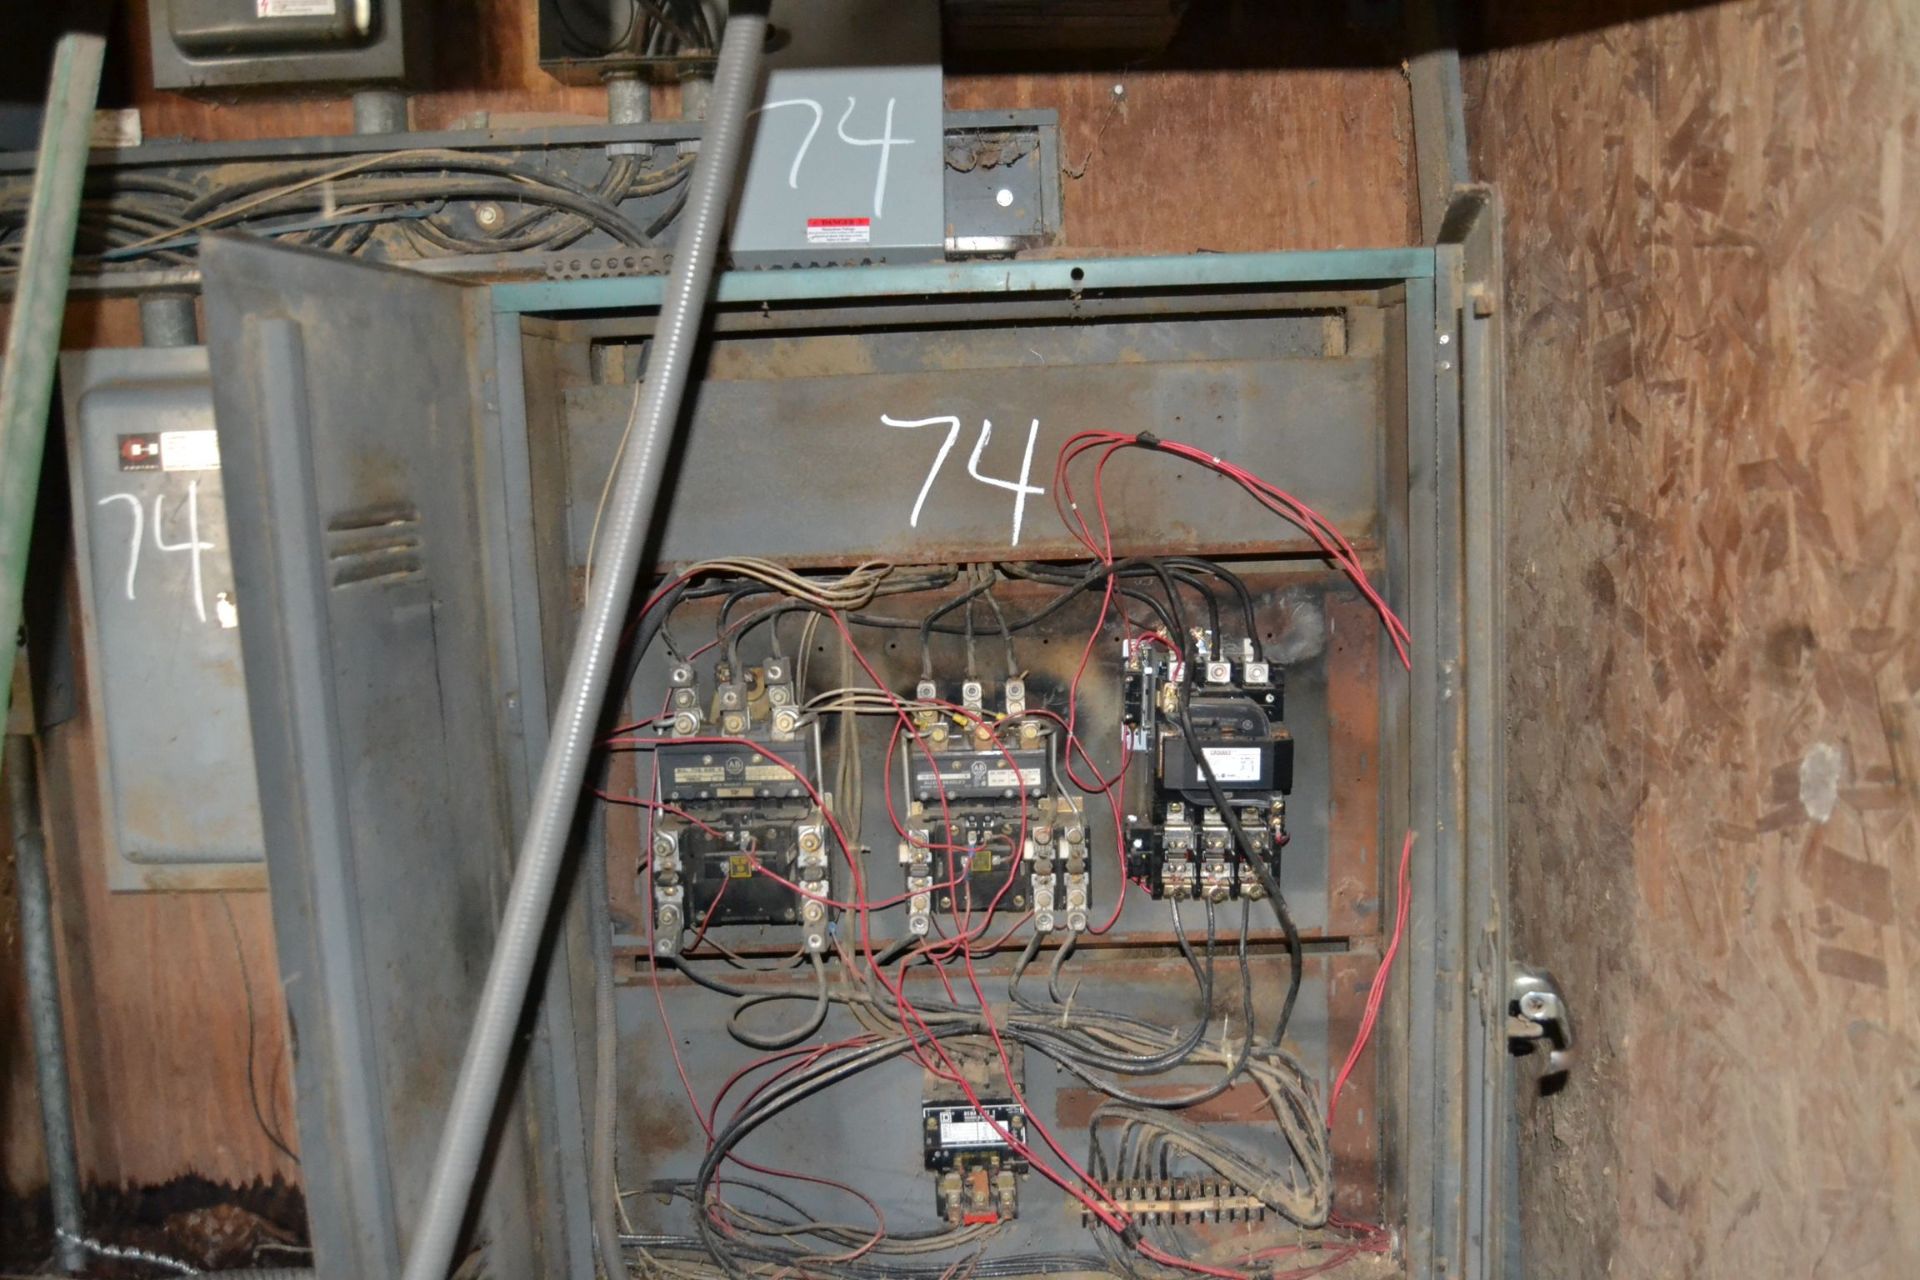 ELECTRICAL PANEL CONSISTING OF: (2) SZ. 4 STARTERS; W/(2) SZ. 3 STARTERS; W/(1) 400 AMP